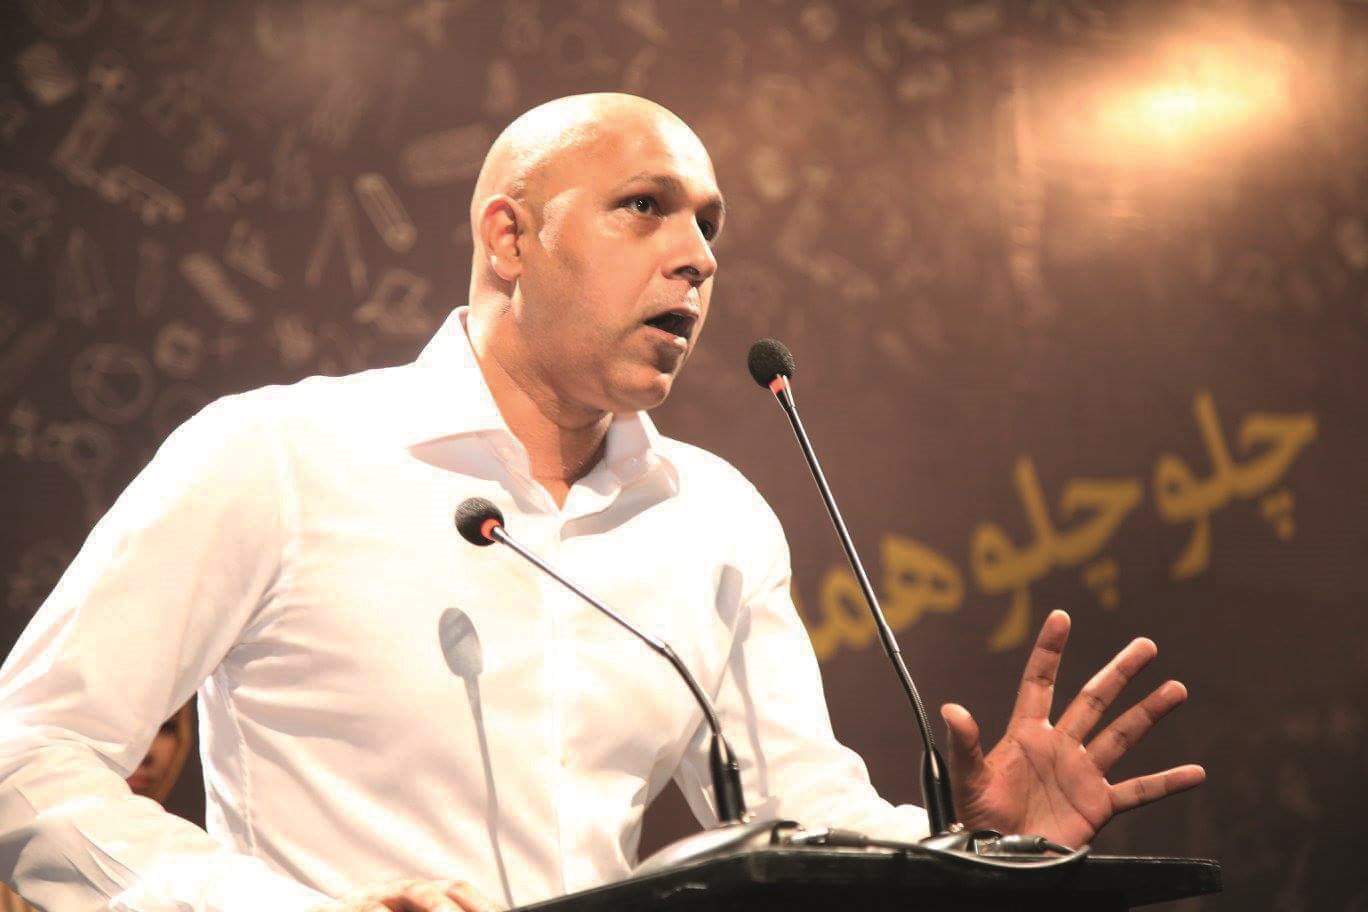 Imran Azhar, the creator of AzCorp, speaking at a conference